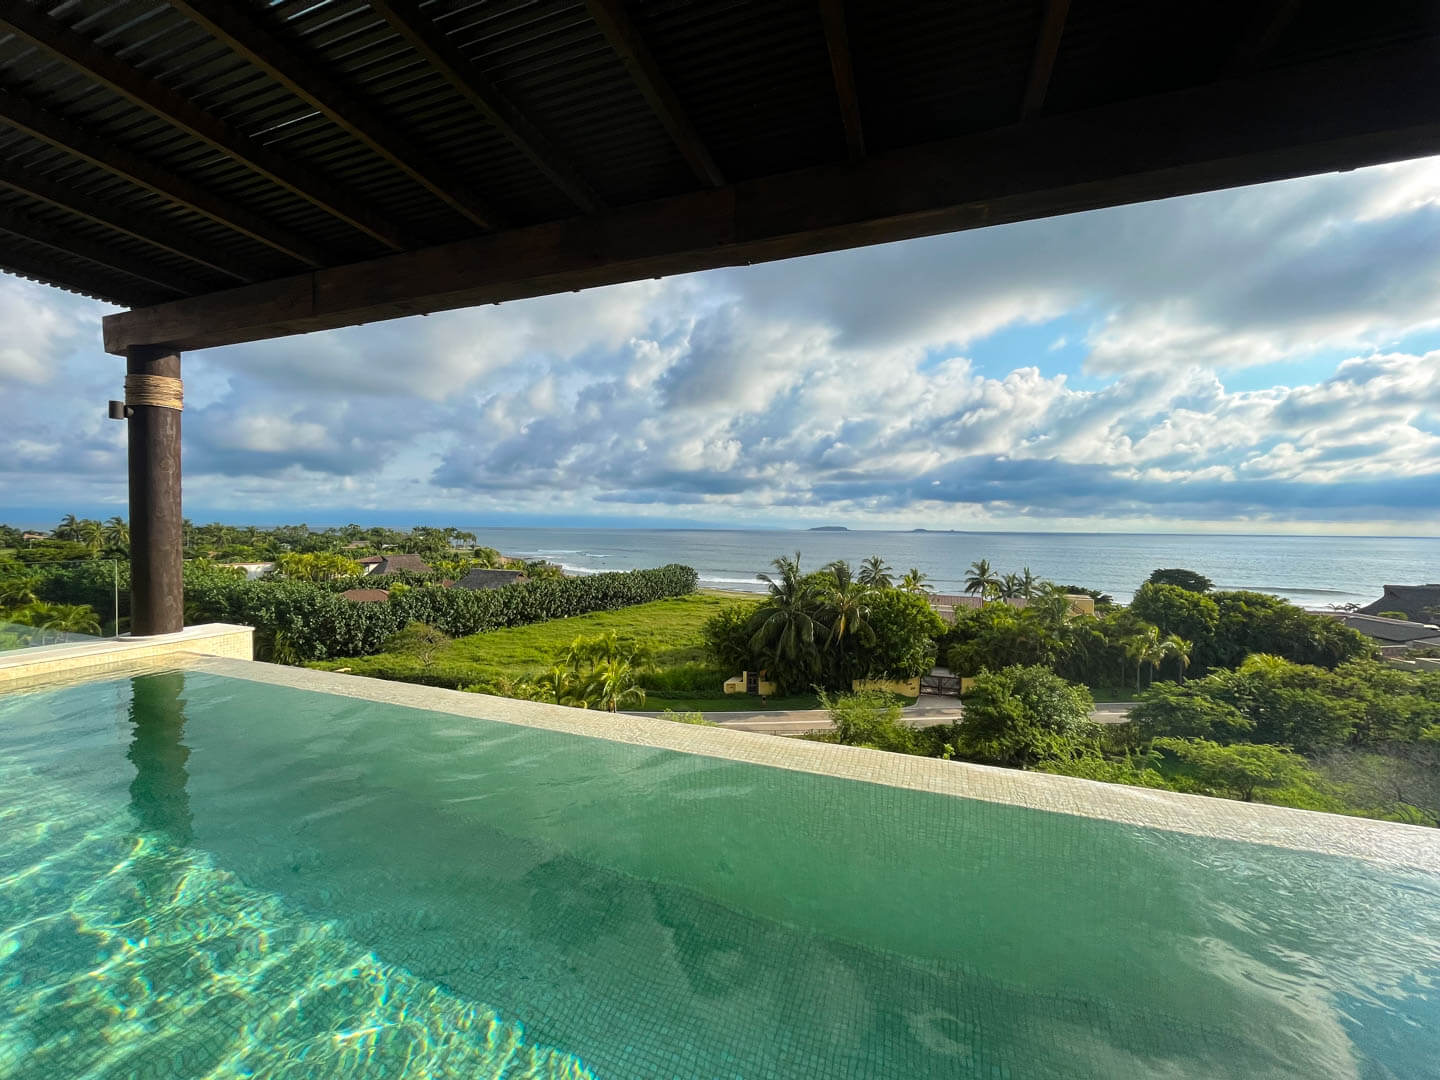 You are currently viewing Condo Azul: An Awesome Luxury Vacation Rental in Punta Mita 